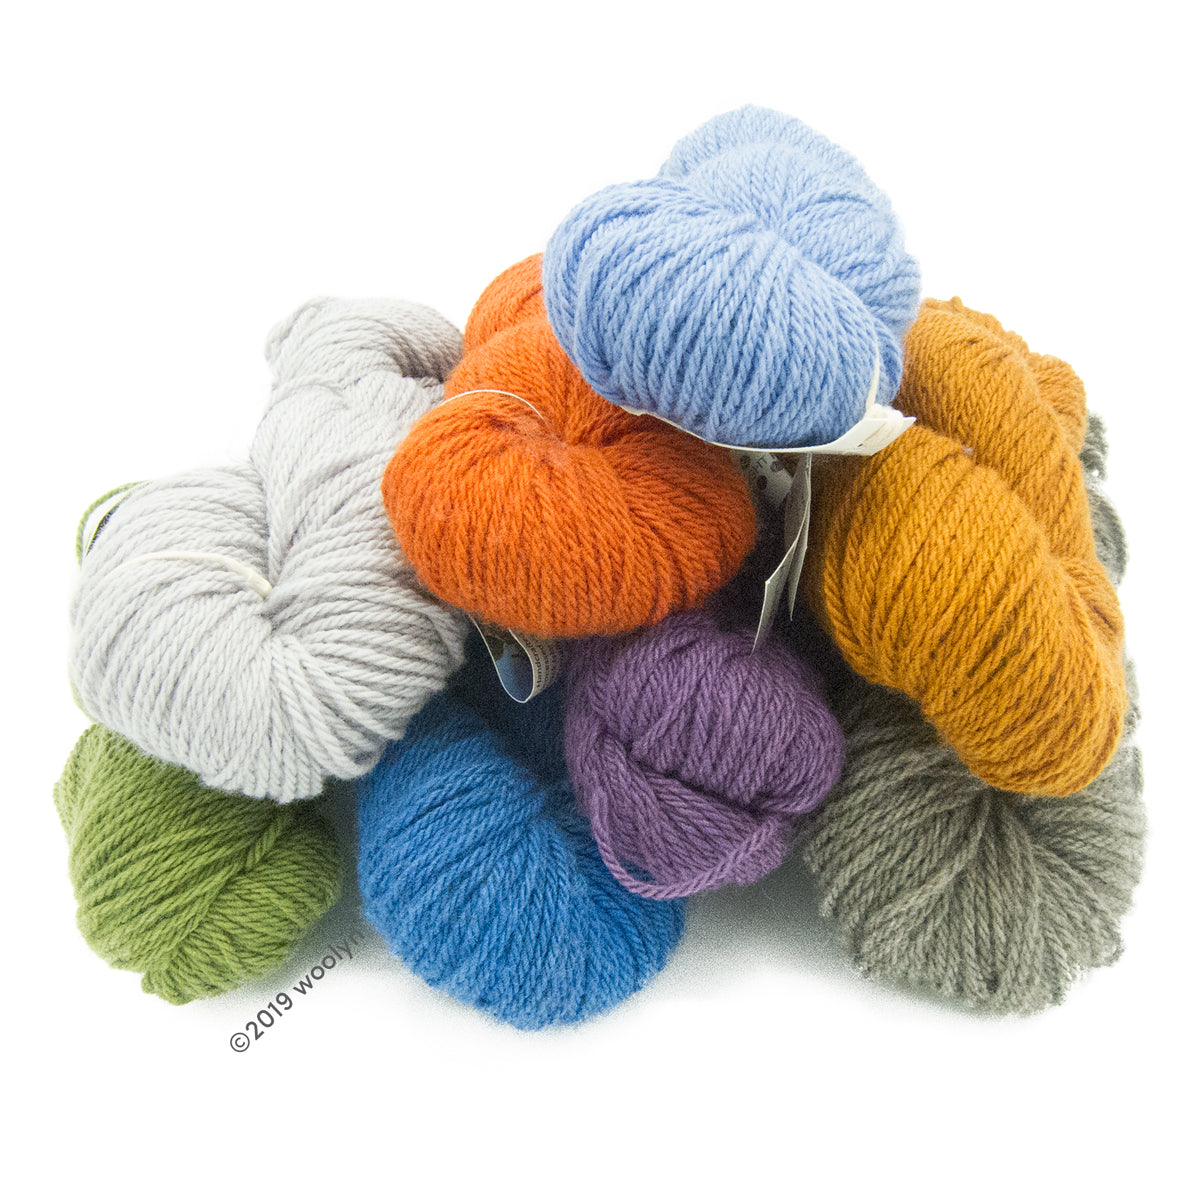 Picture of a variety of North Light Fibers Atlantic skeins a 100% Falkland Islands Merino.